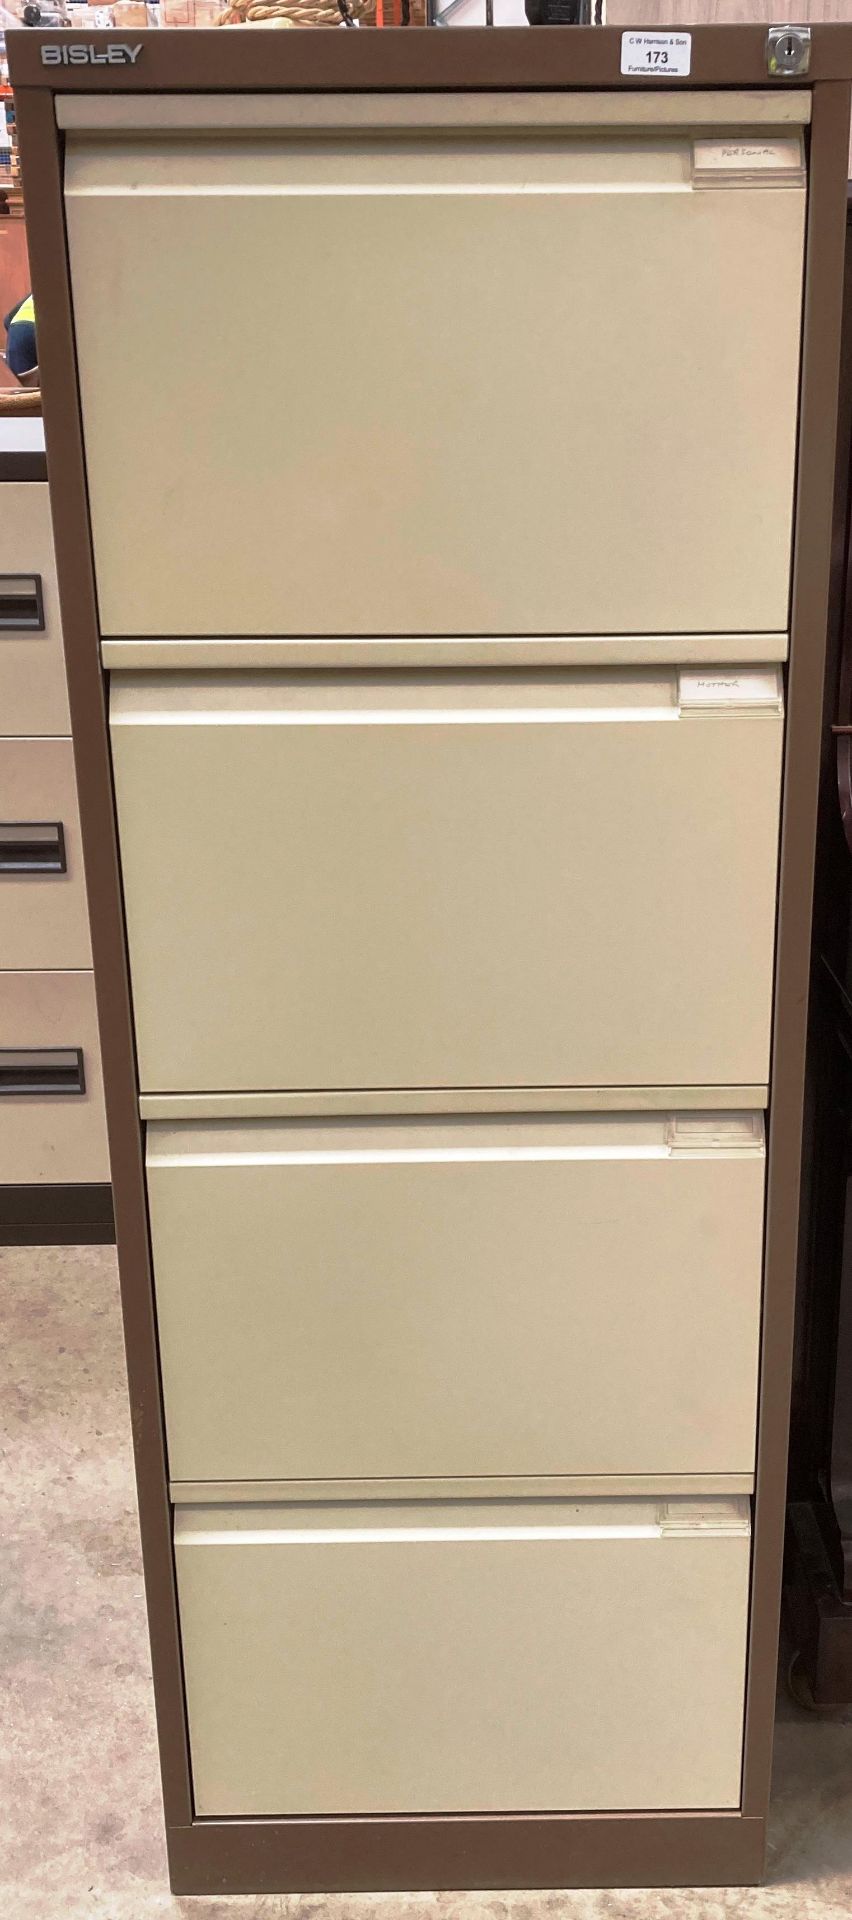 A Bisley brown and beige metal four drawer filing cabinet